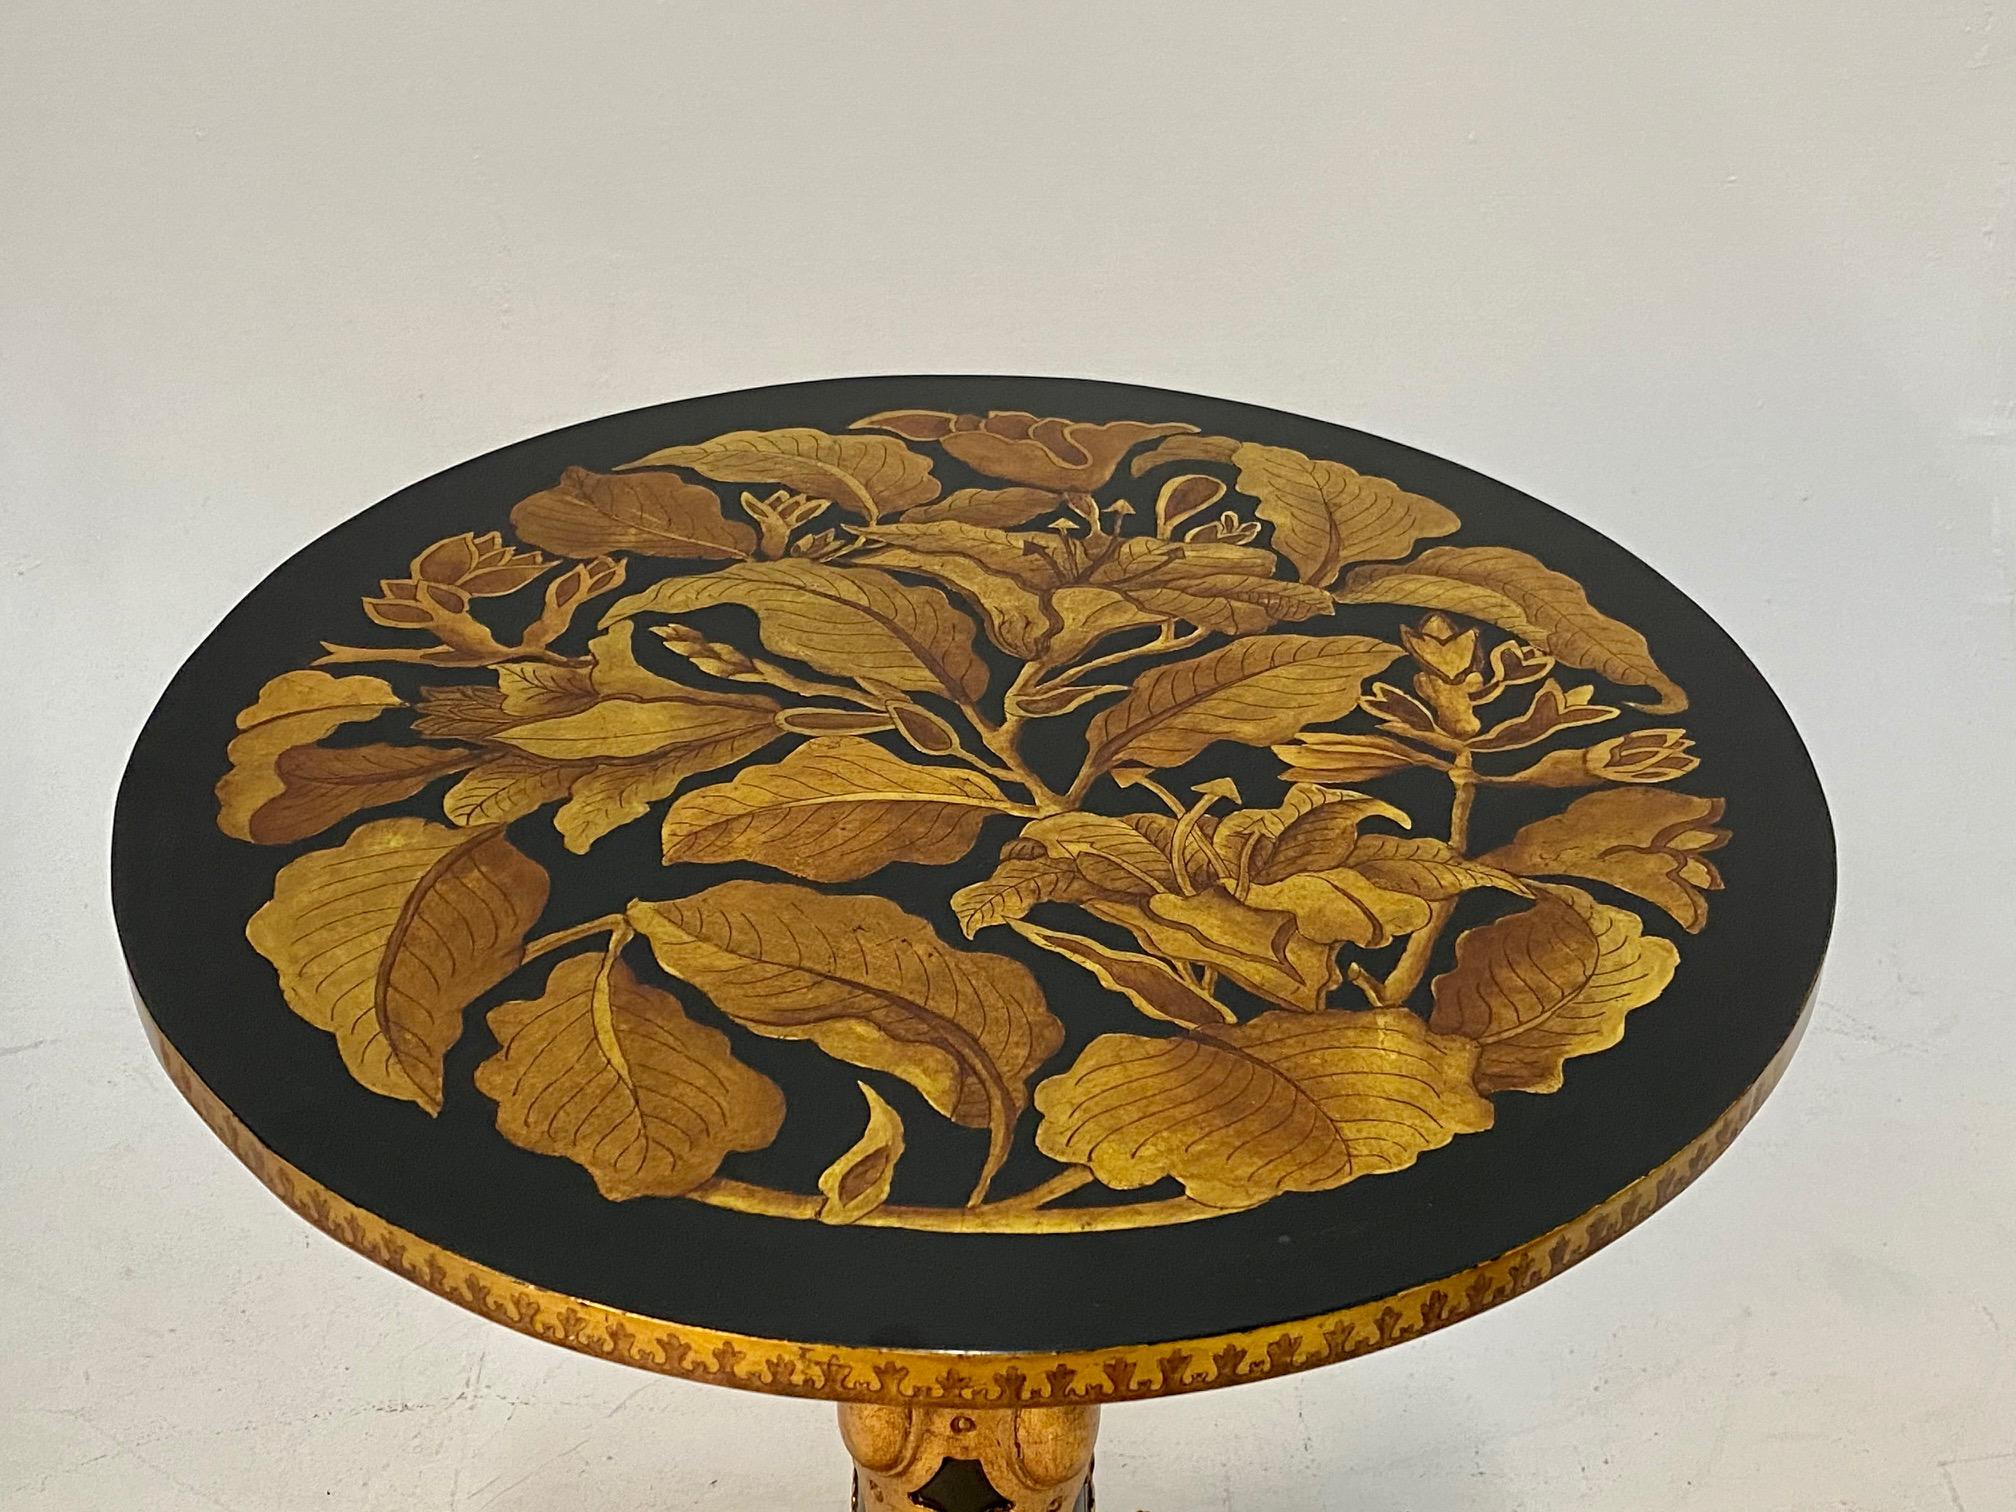 Sublimely decorated hand carved and painted round side or end table with striking black and gold color combination, having 4 curved feet, raised gilt decoration on column and feet, and gorgeous leaf motife embellishments. Original label underside.